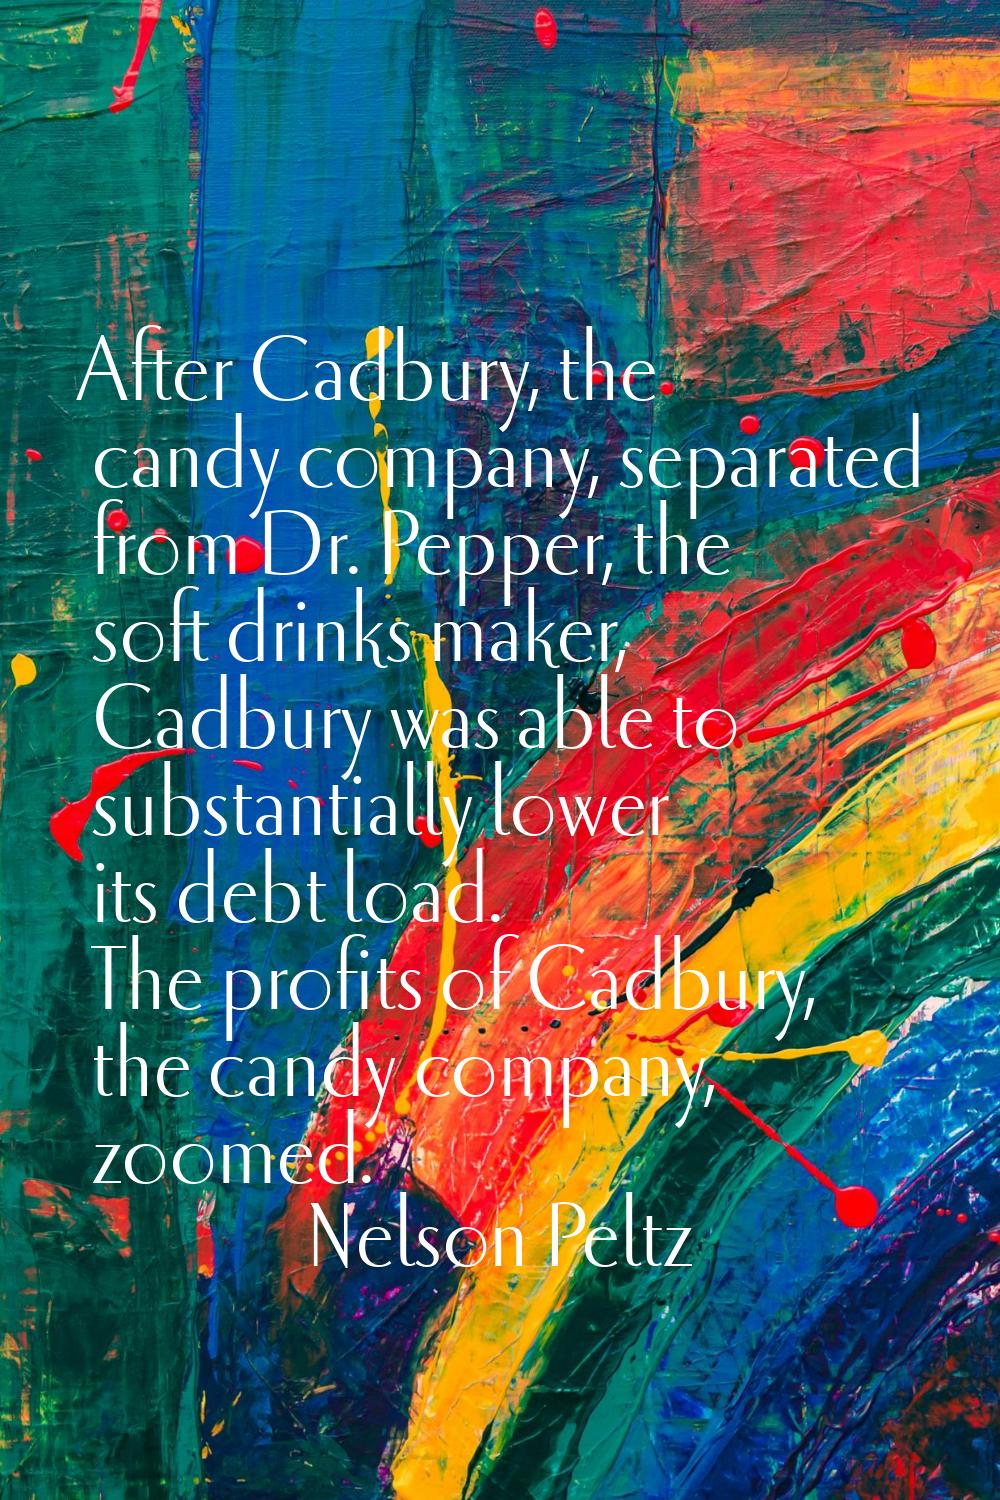 After Cadbury, the candy company, separated from Dr. Pepper, the soft drinks maker, Cadbury was abl